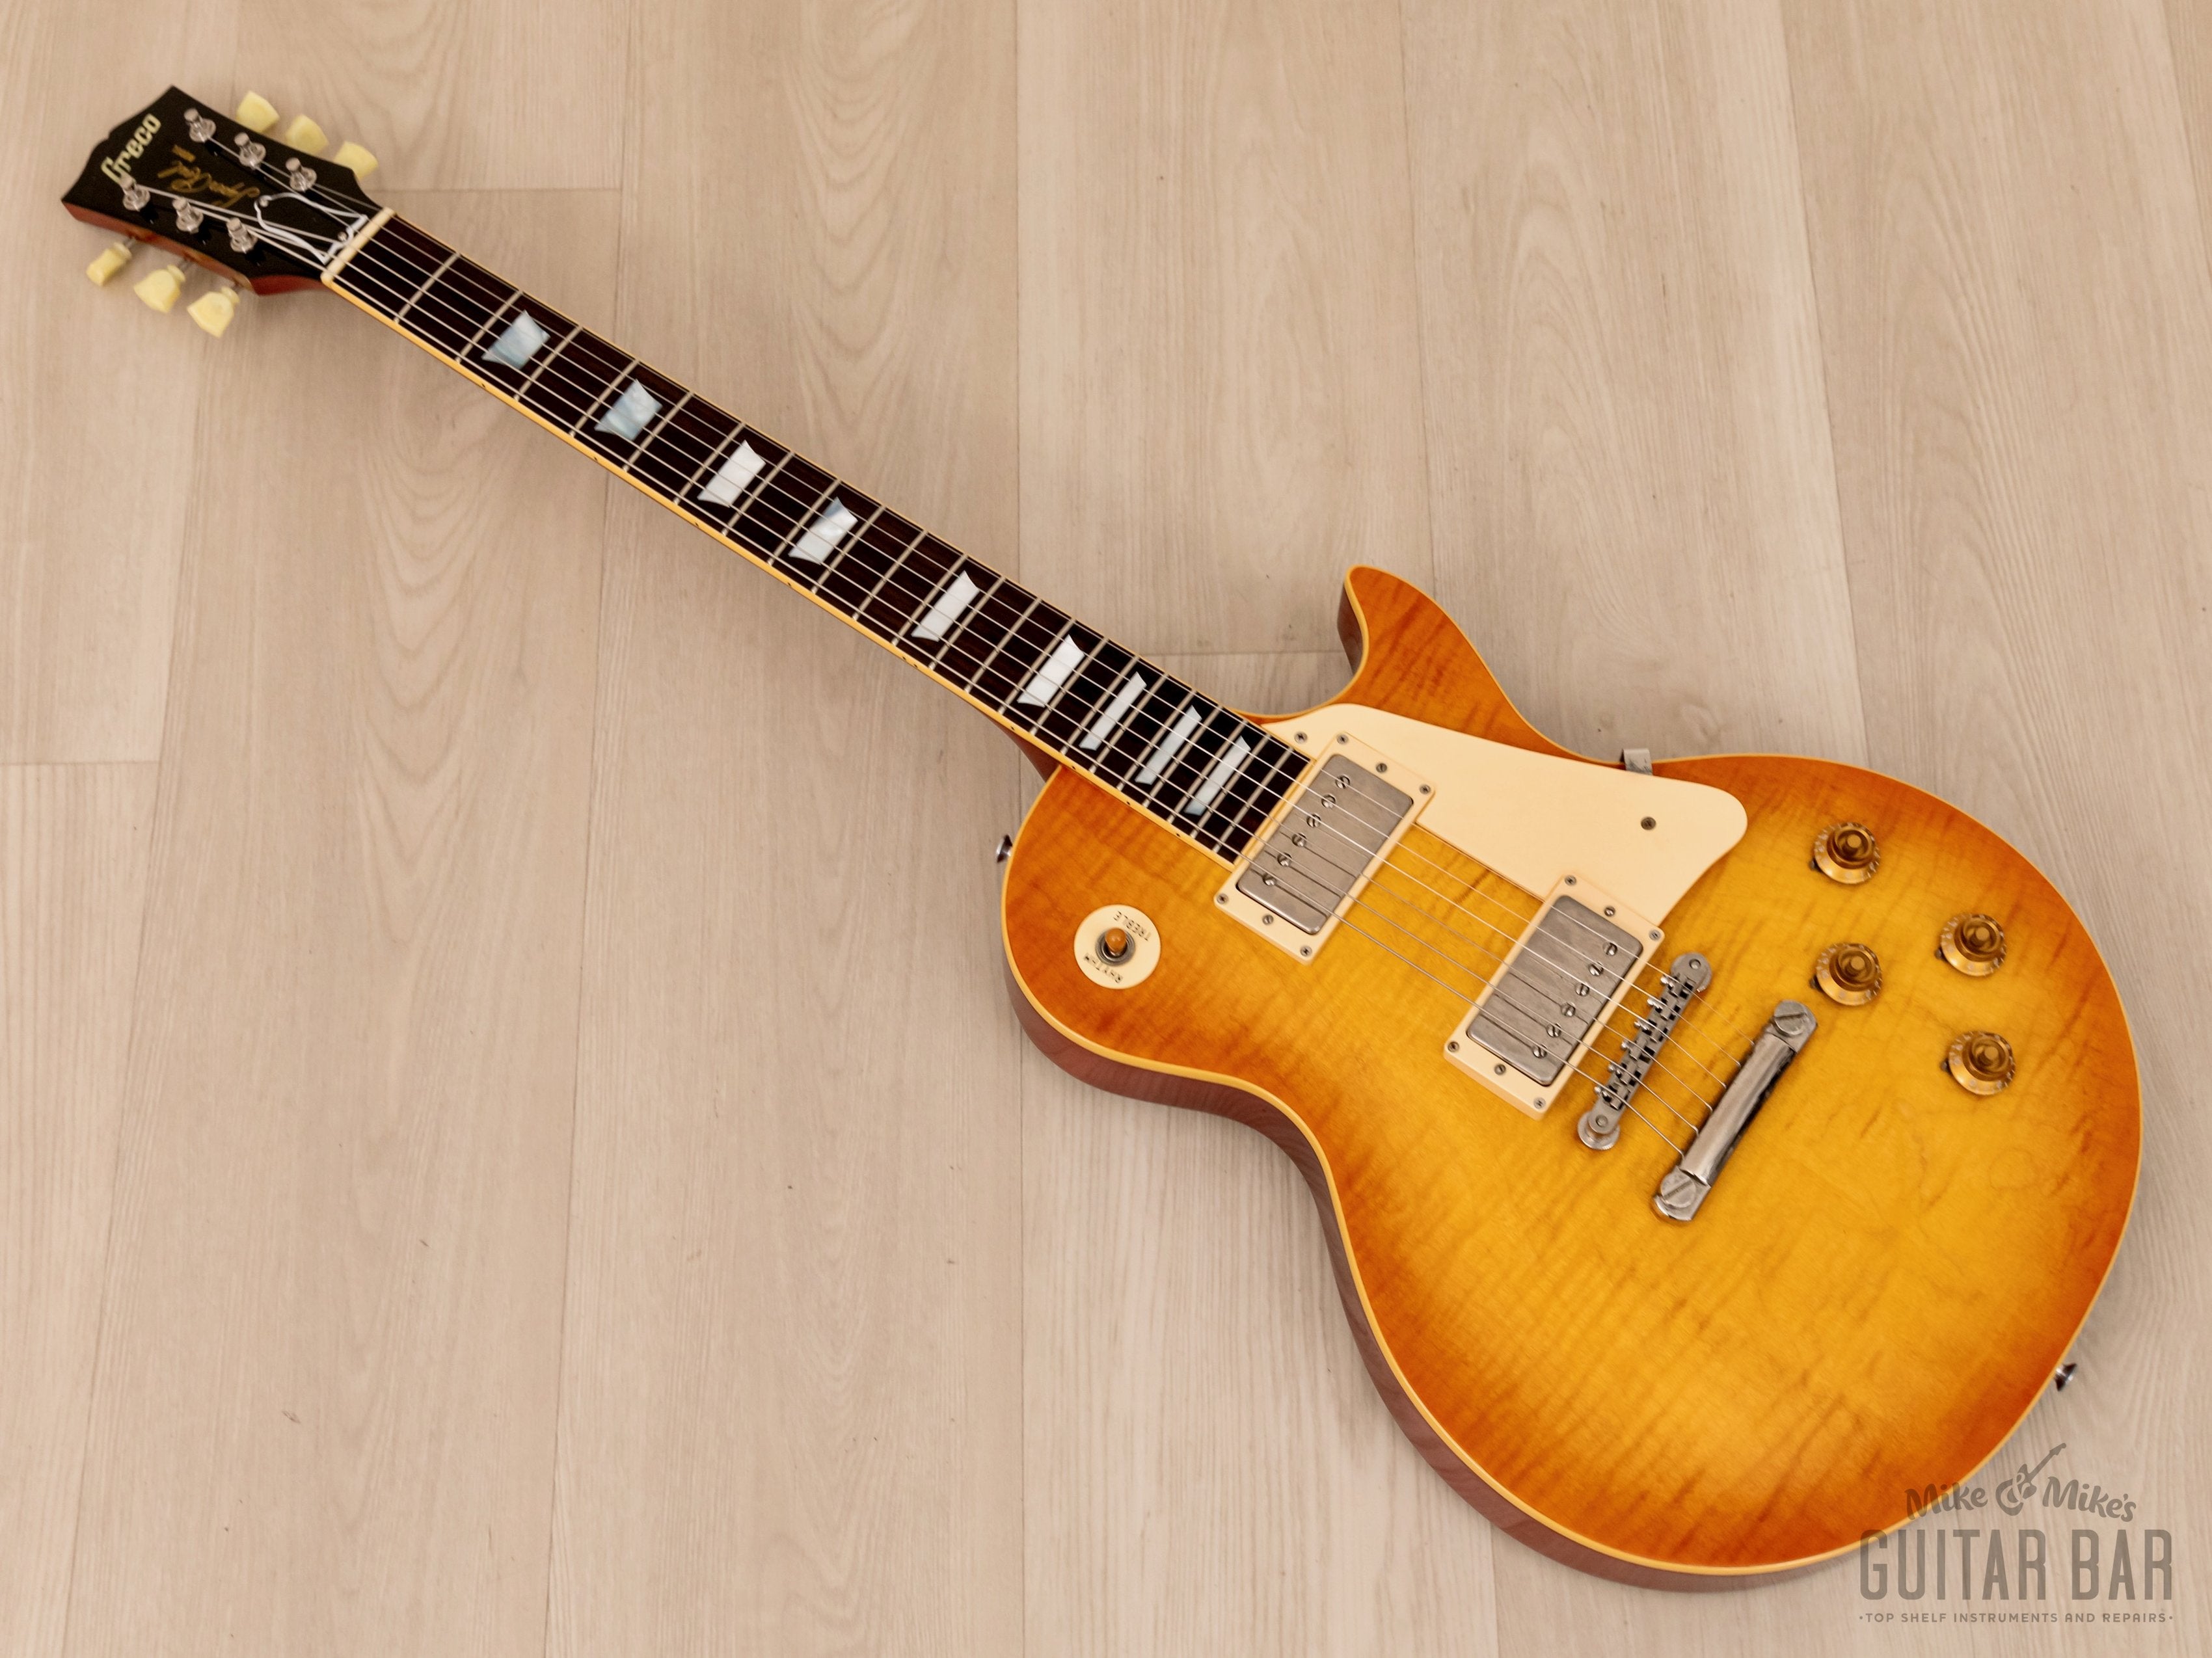 1980 Greco Super Real EGF1200 Vintage Burst Lacquer Finish w/ Dry Z PAFs & Brazilian Board, Japan